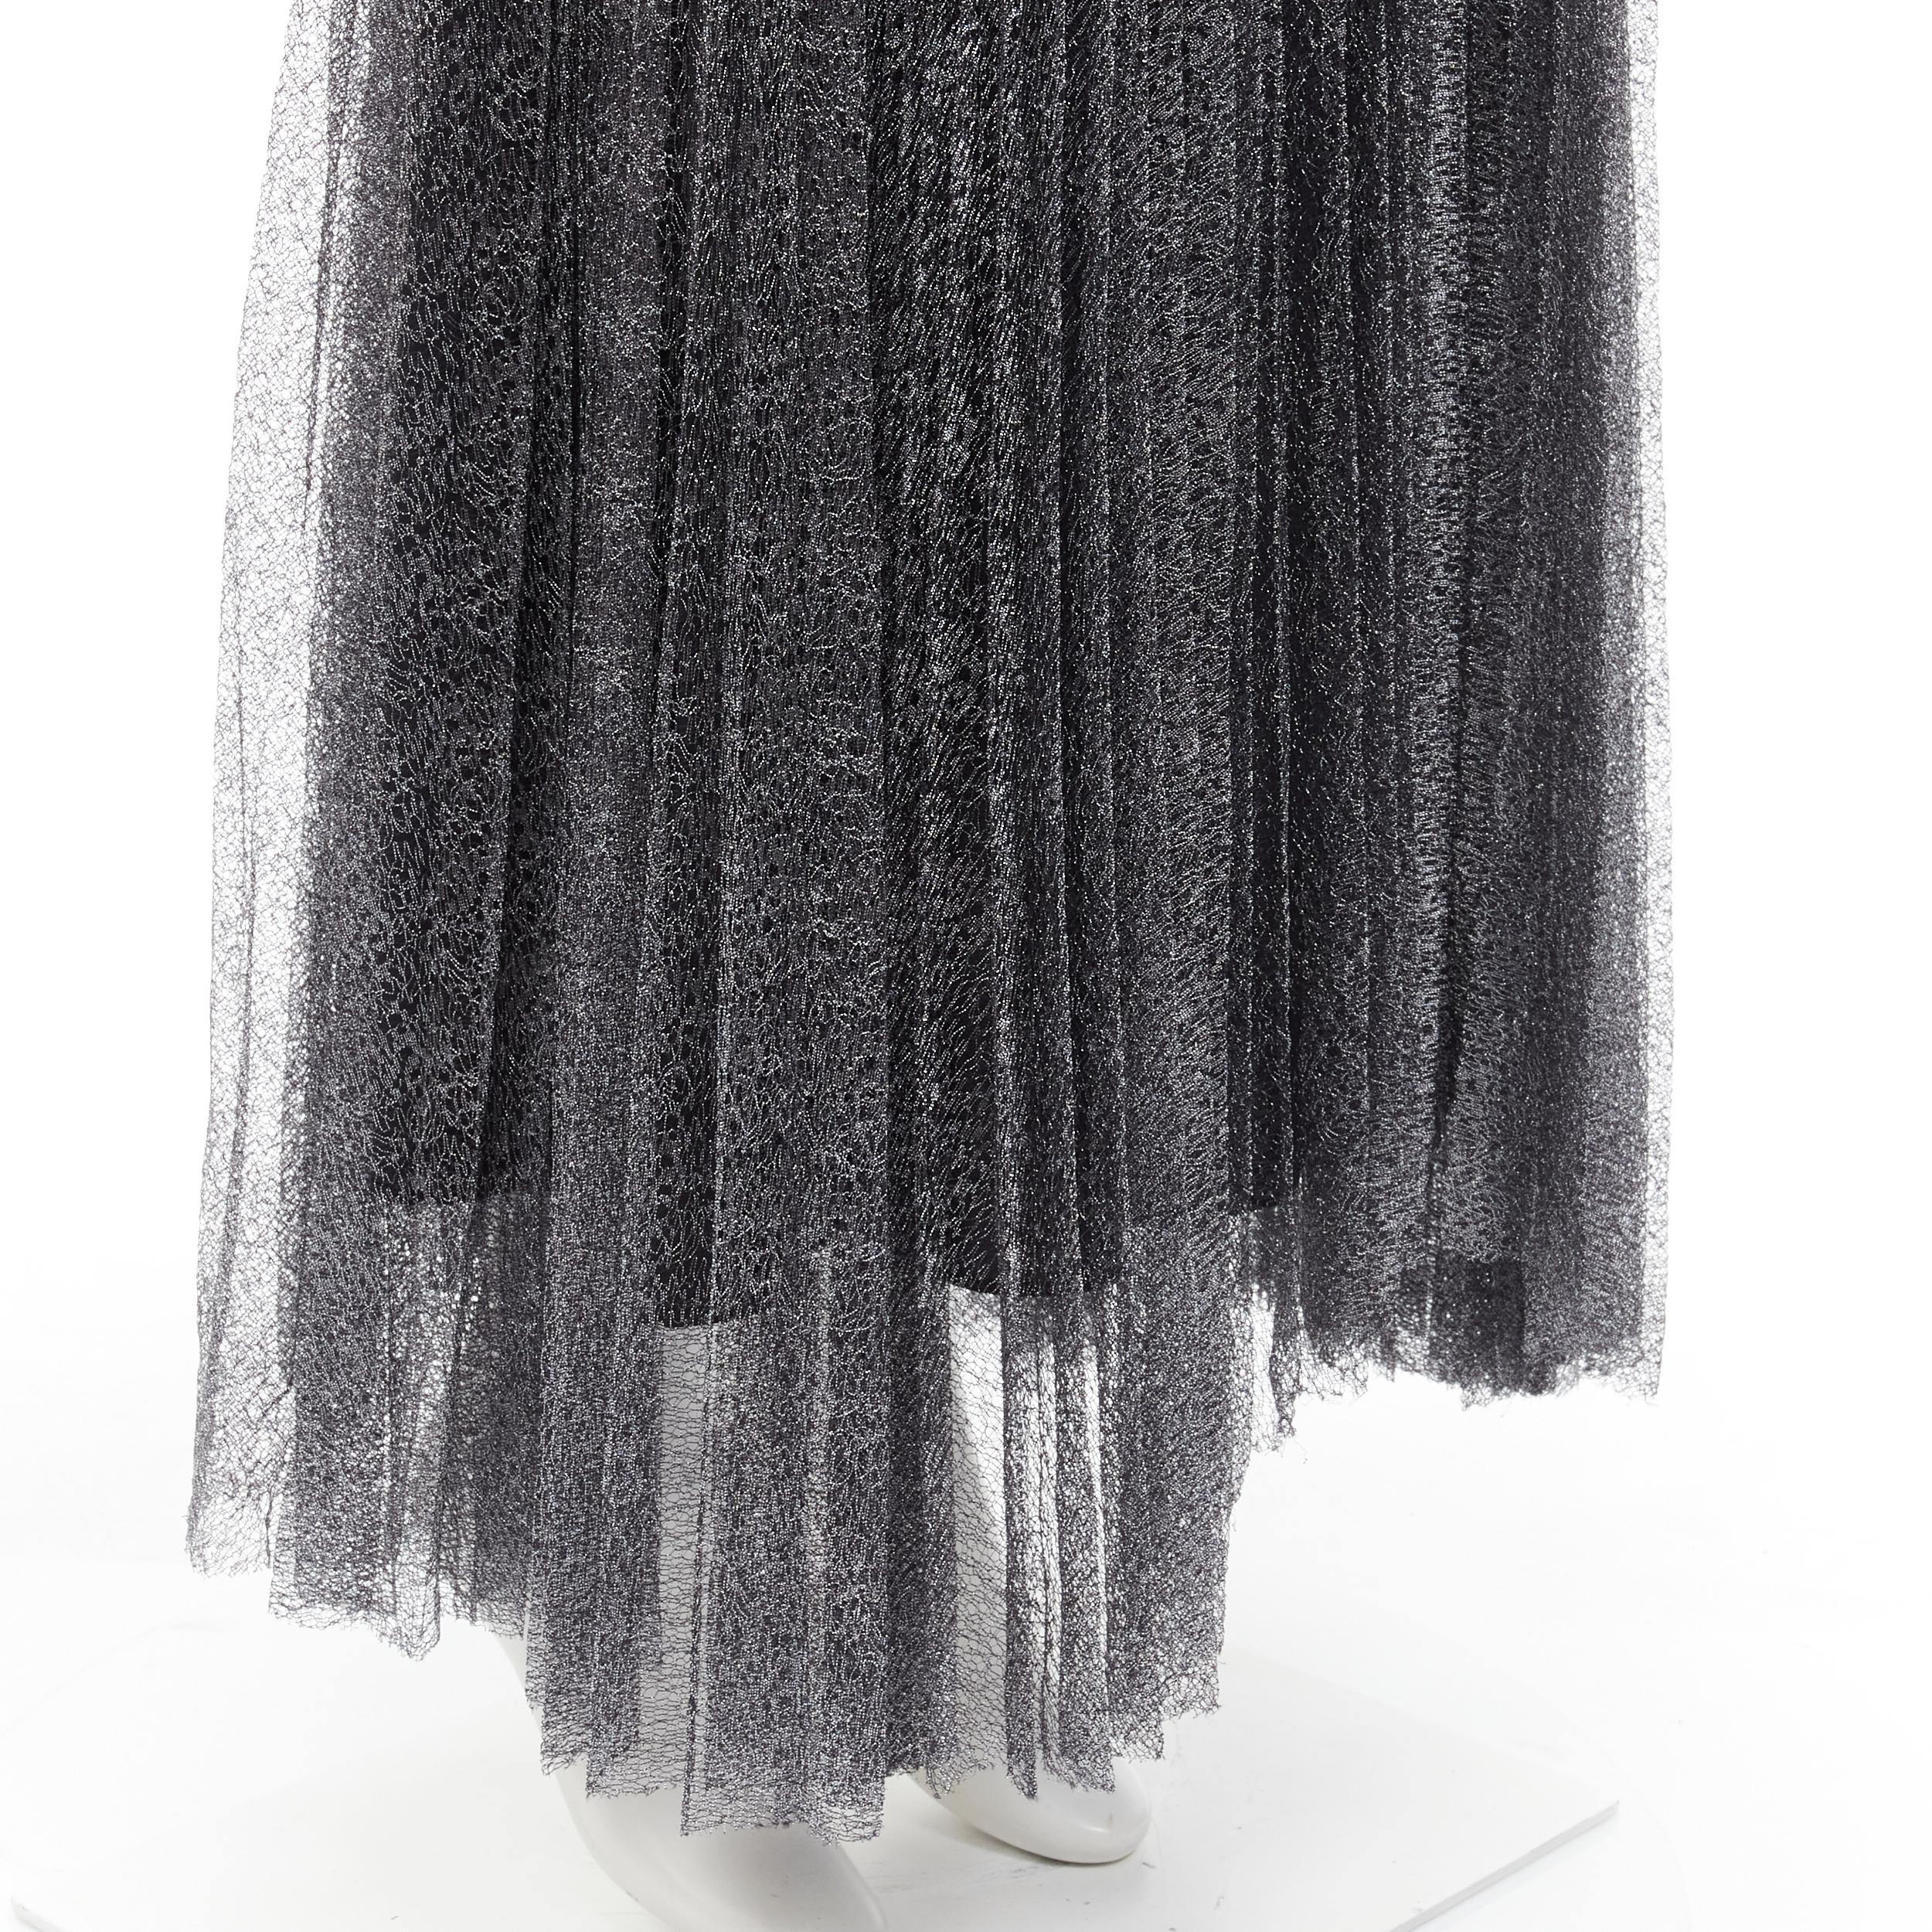 ALICE OLIVIA metallic silver thread black pleated asymmetric hem skirt US2
Brand: Alice Olivia
Material: Nylon
Color: Silver
Pattern: Solid
Closure: Zip
Made in: China

CONDITION:
Condition: Excellent, this item was pre-owned and is in excellent